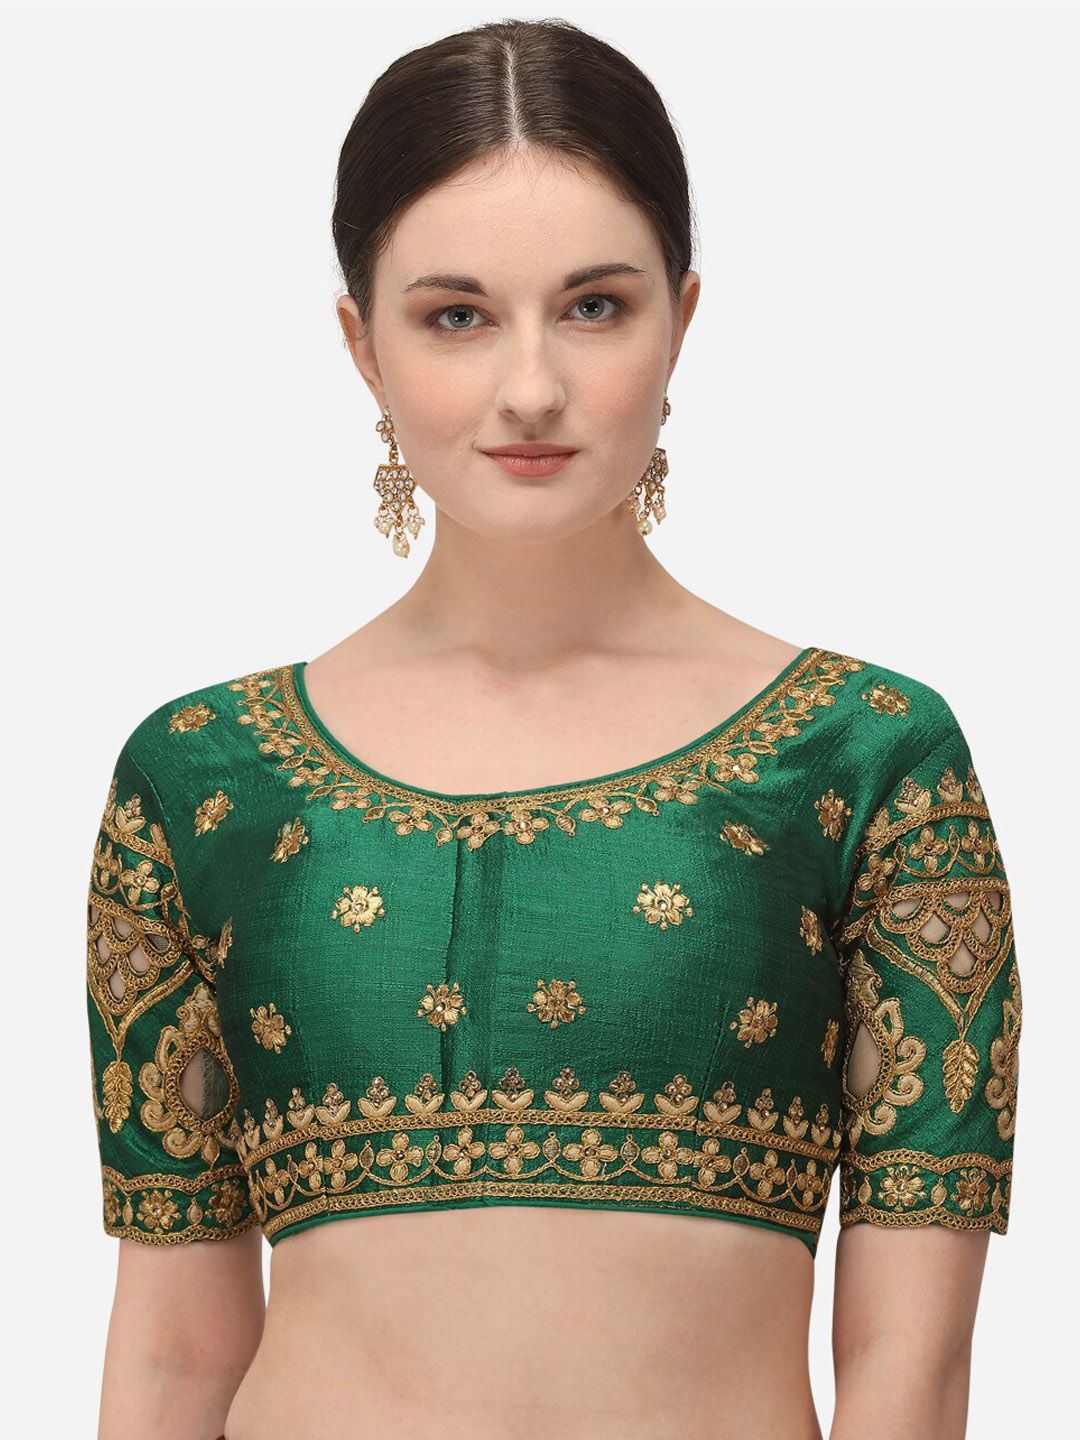 Amrutam Fab Women Green & Gold-Coloured Embroidered  Saree Blouse Price in India